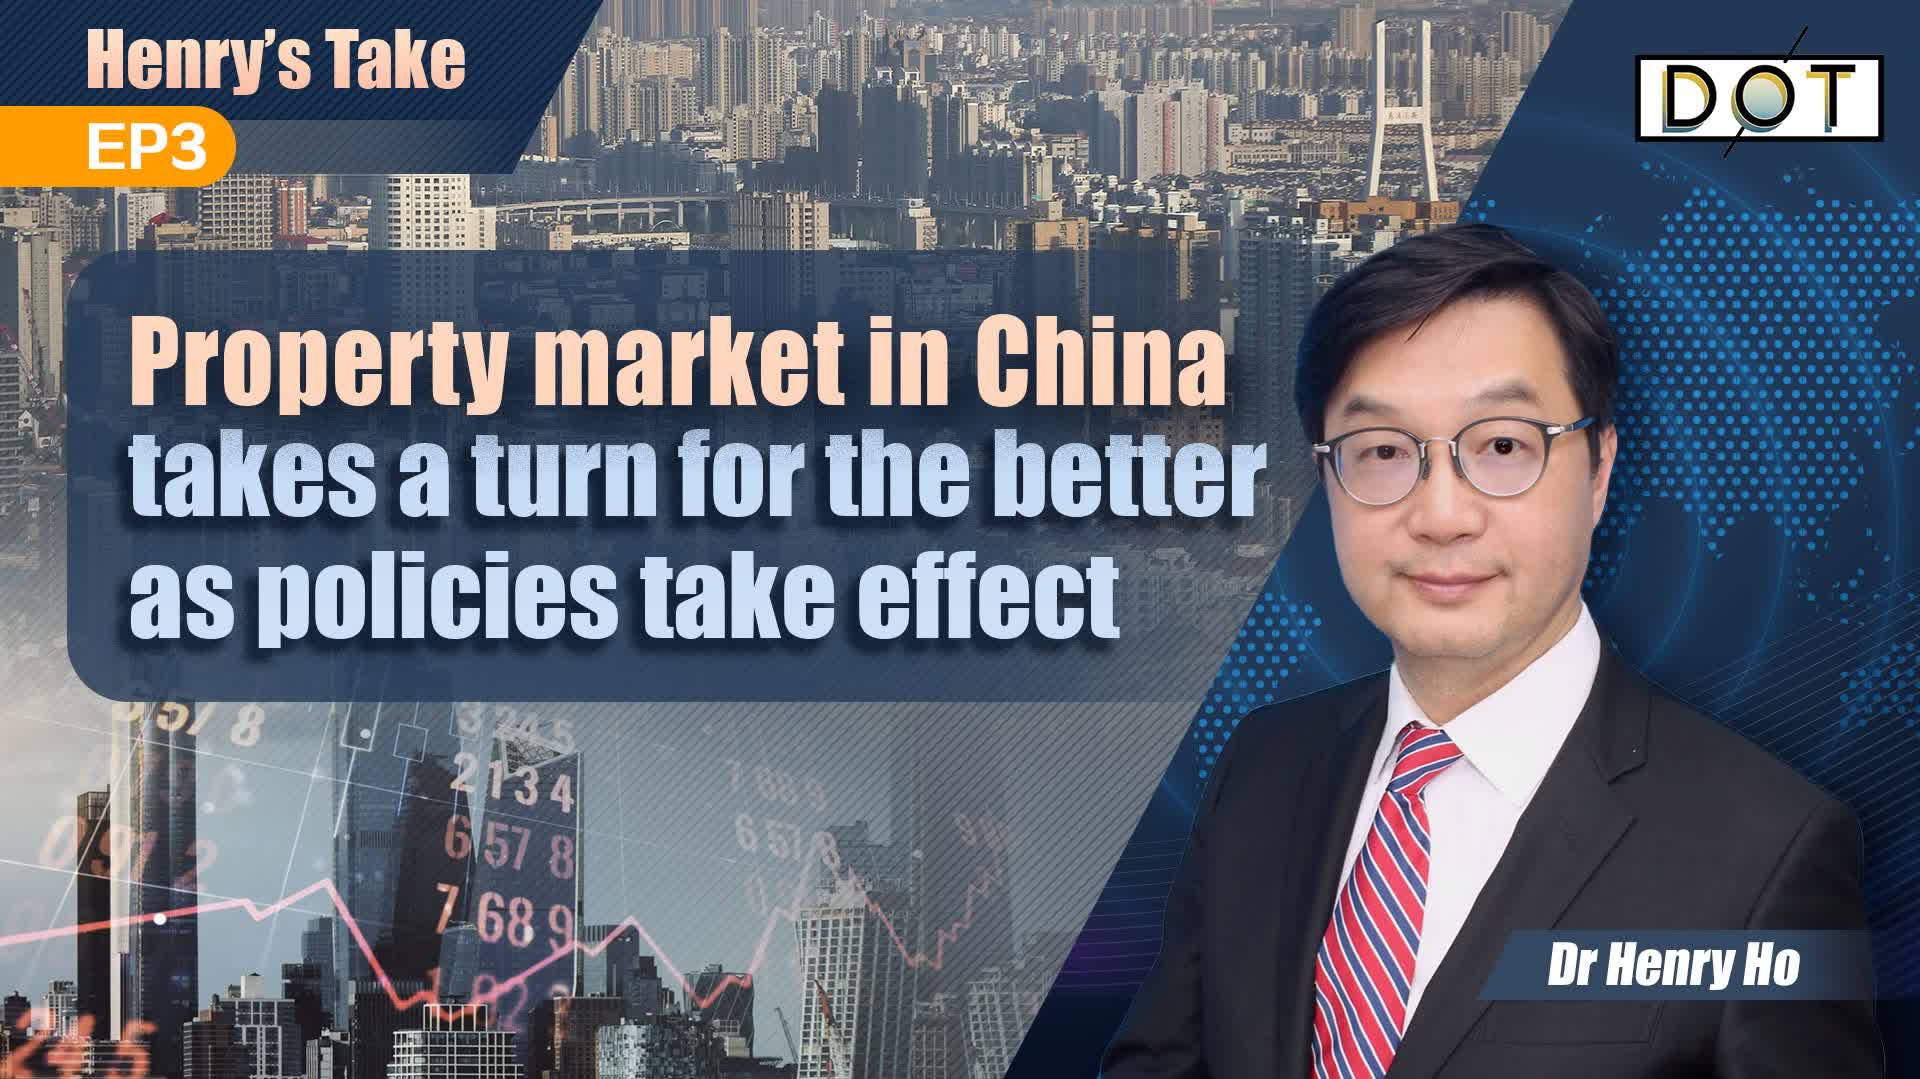 Henry's Take EP3 | Property market in China takes a turn for the better as policies take effect